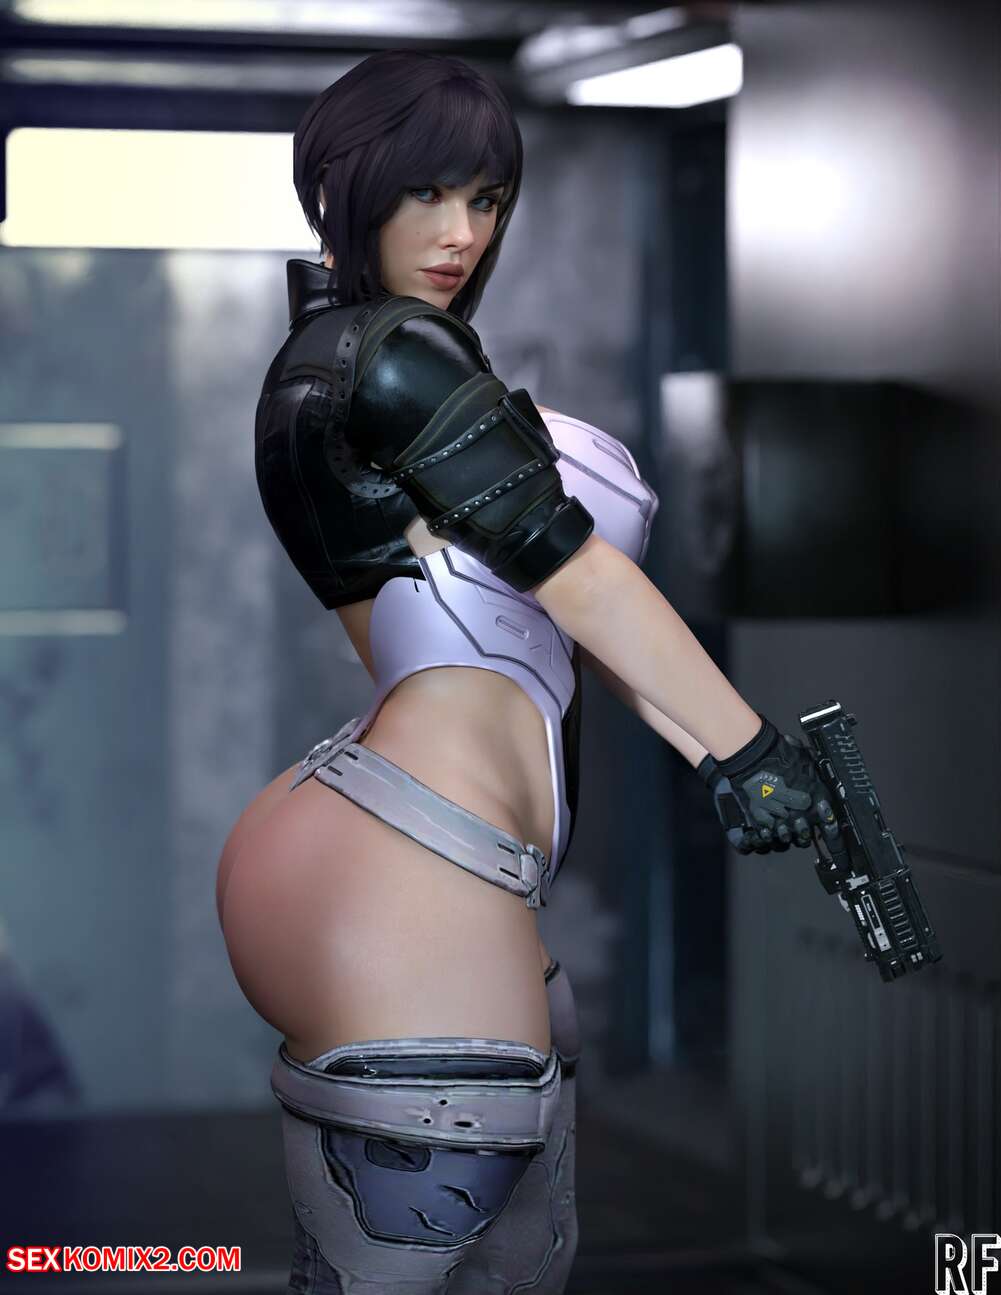 amie jacobsen add ghost in the shell sex photo